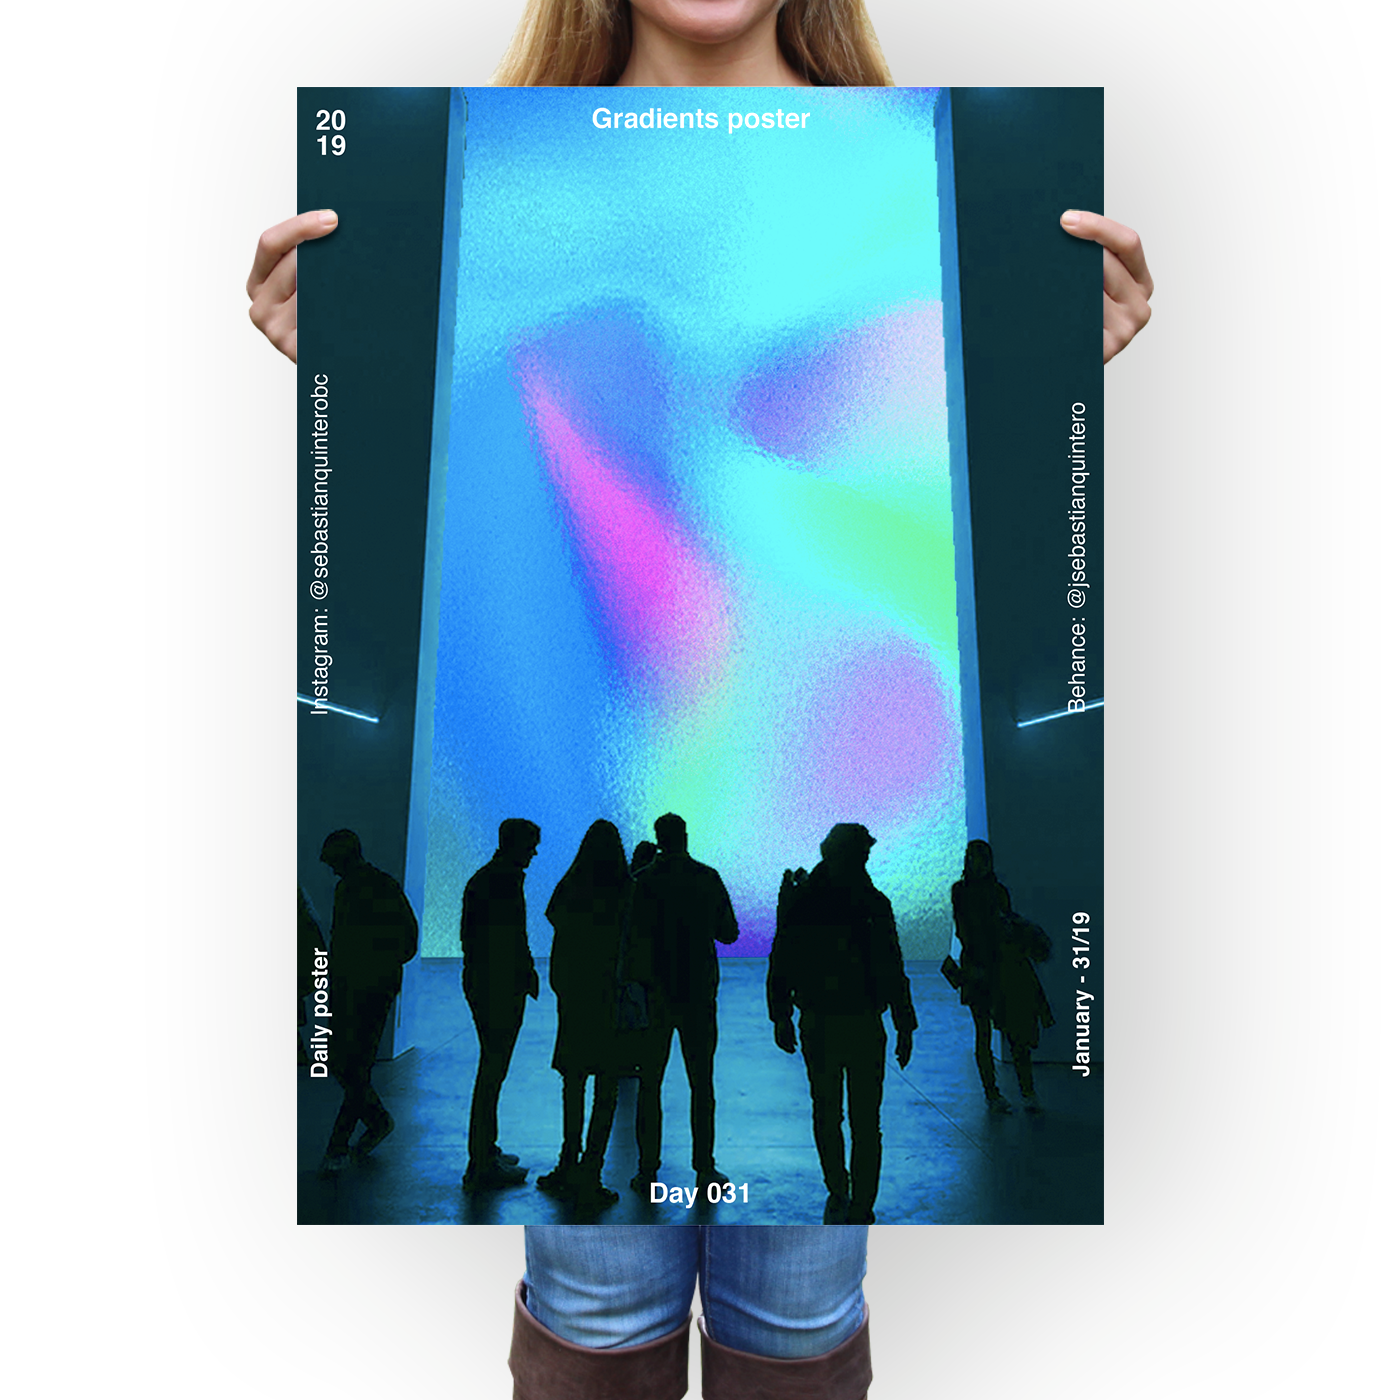 poster design graphicdesign abstract color PosterArt photoshop Illustrator Mockup